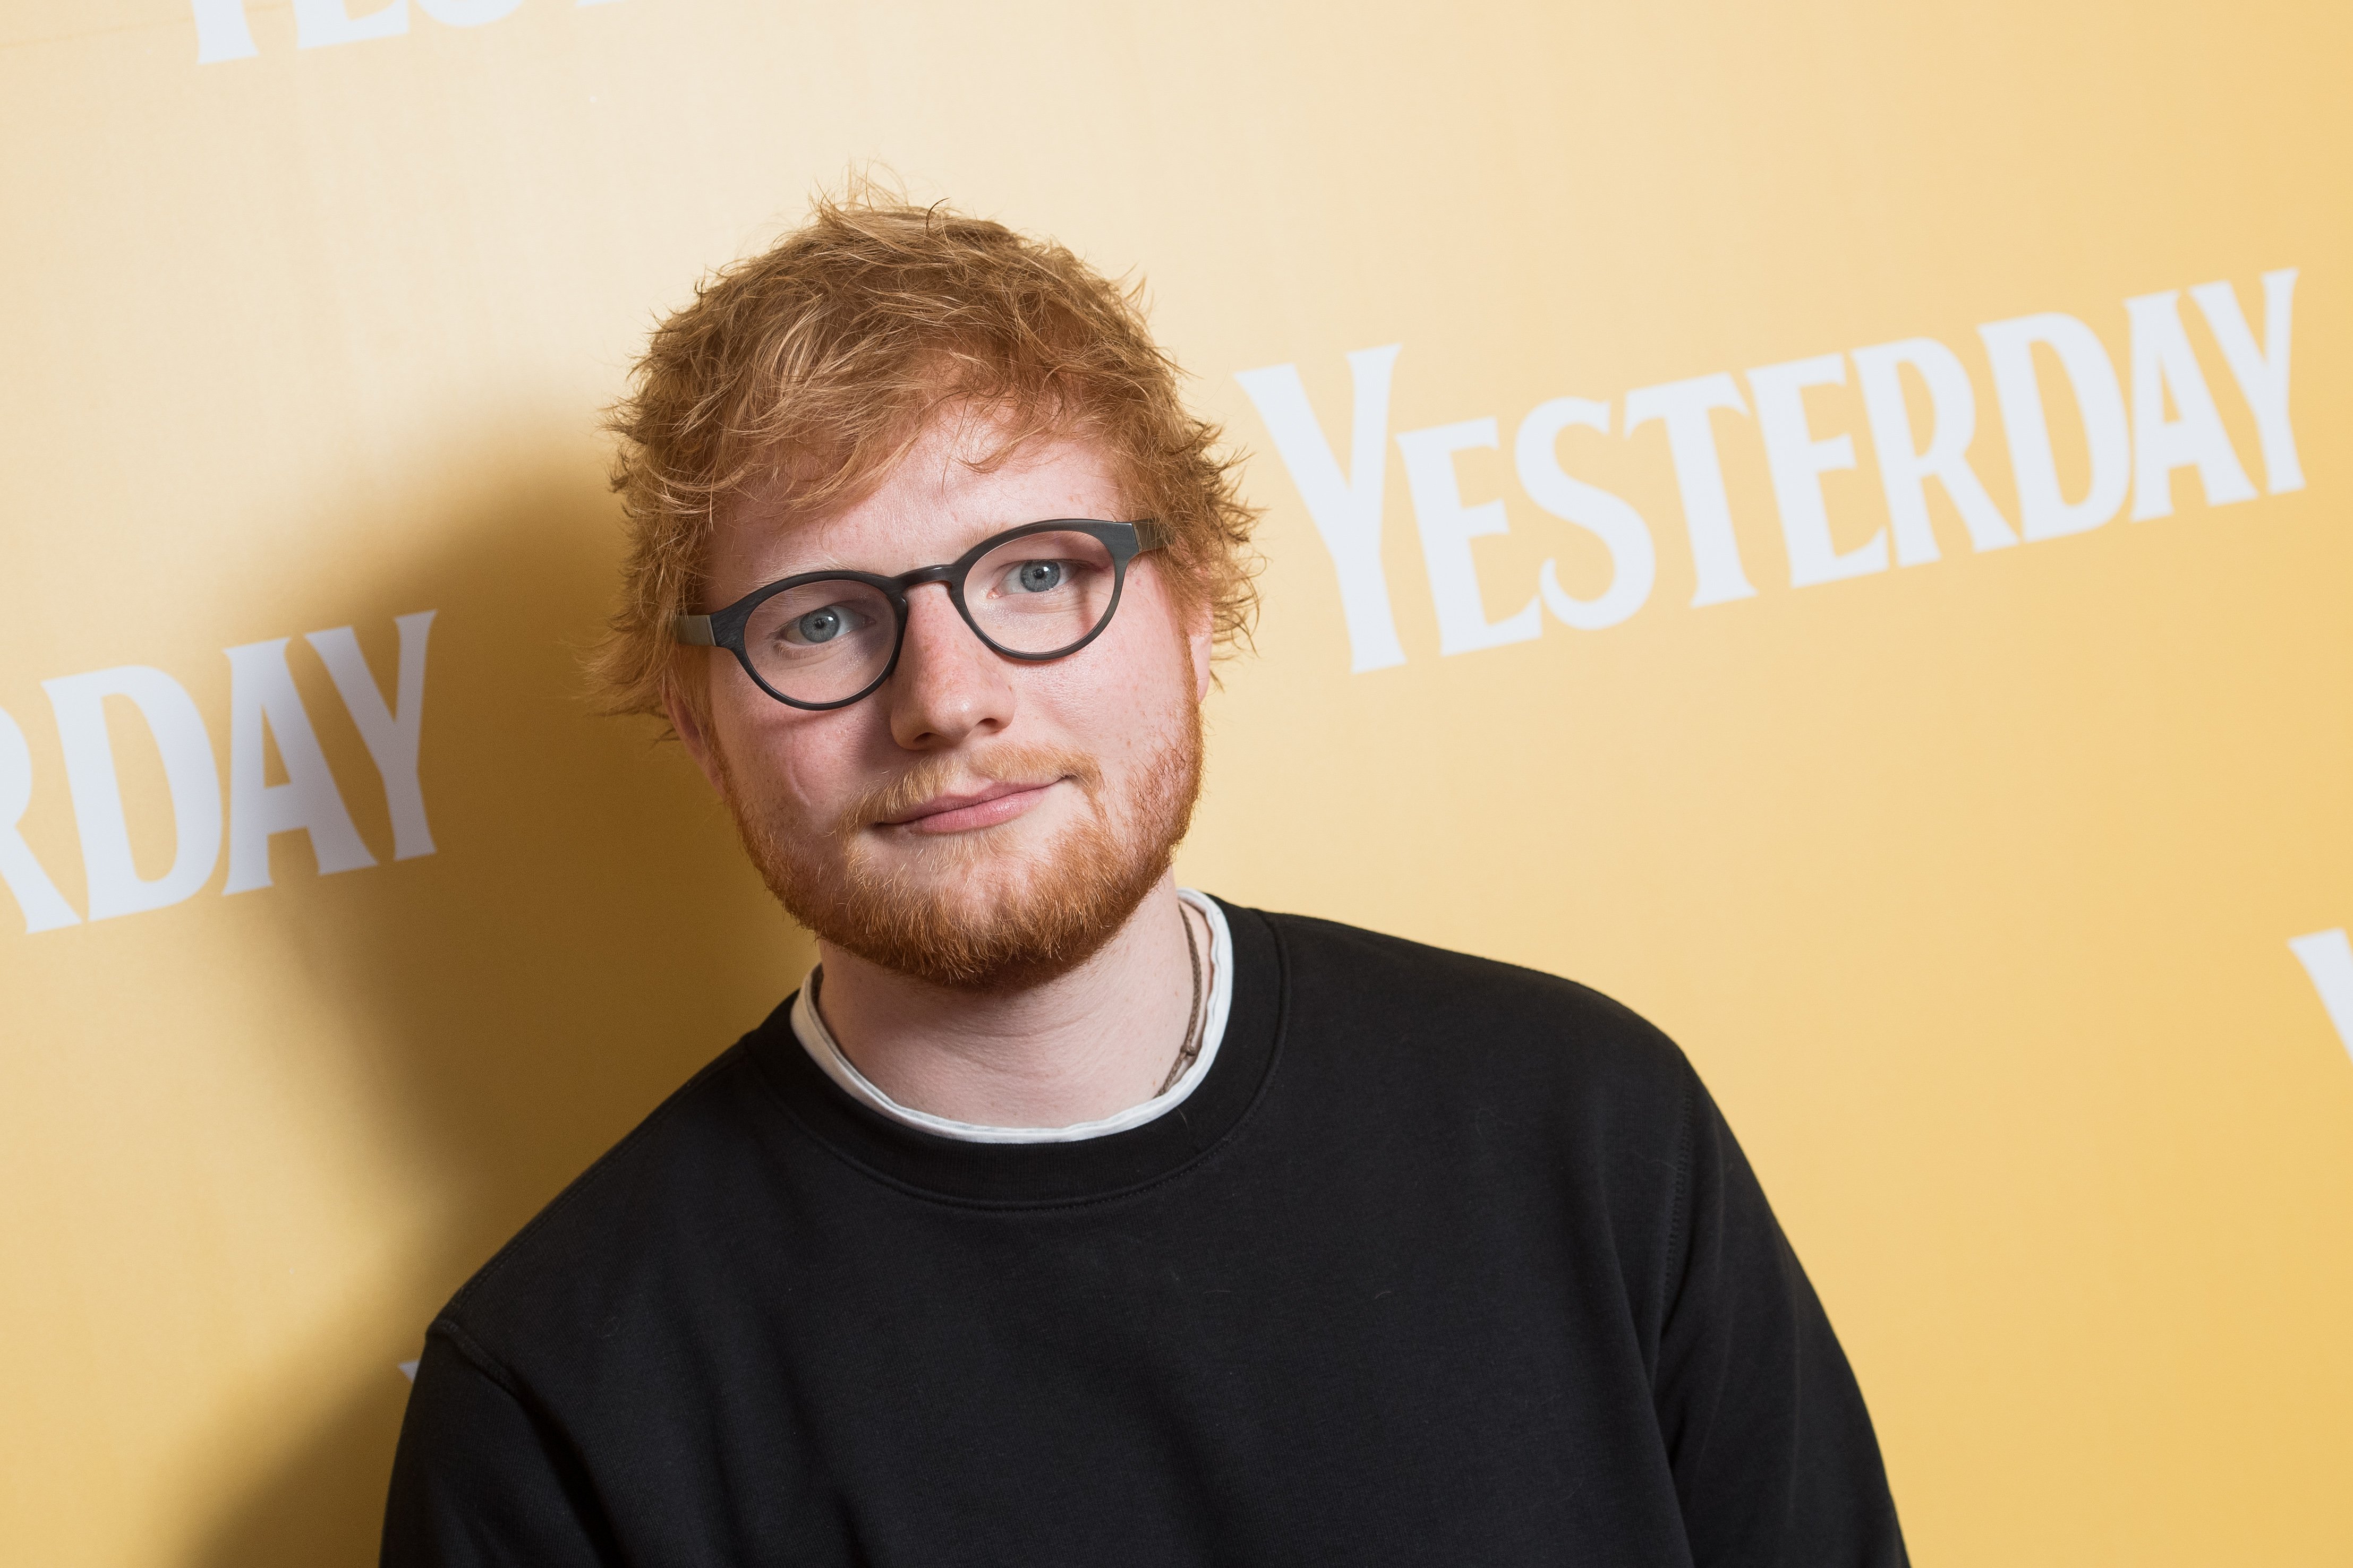 Source: Getty Images / Ed Sheeran attends special screening of "Yesterday" on June 21, 2019 in Gorleston-on-Sea, England